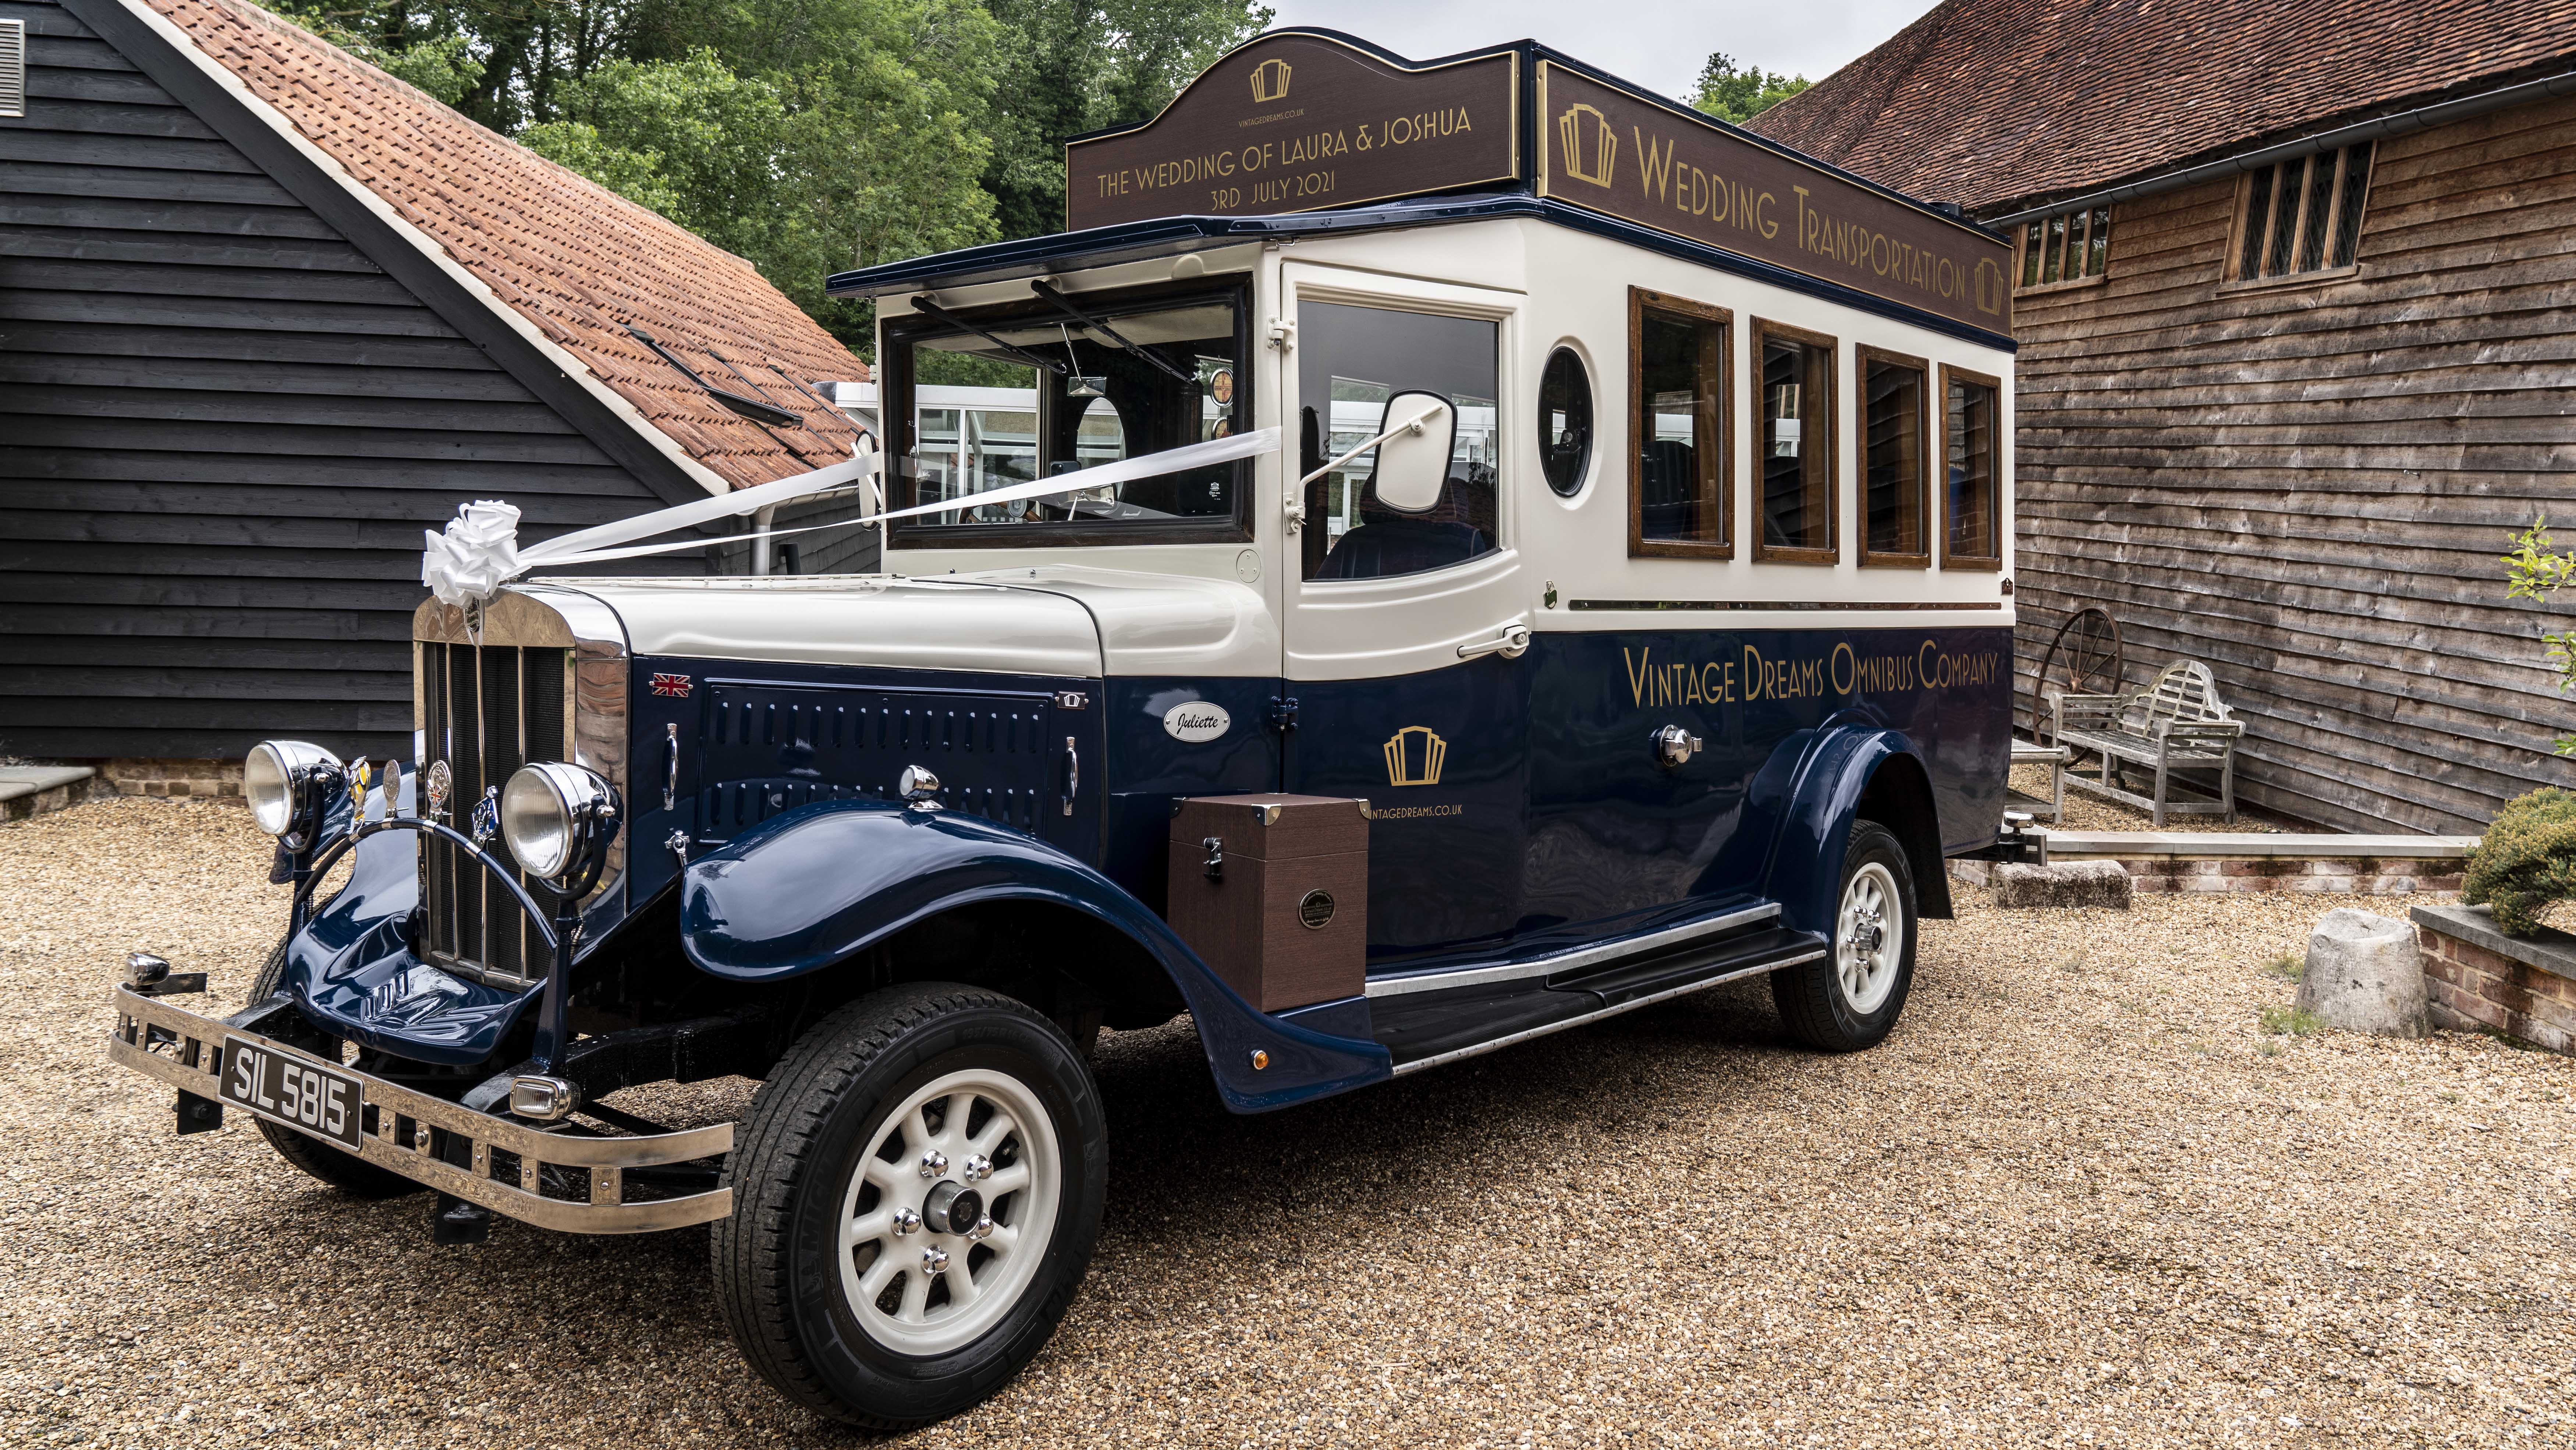 Asquith Bus wedding car for hire in Colchester, Essex